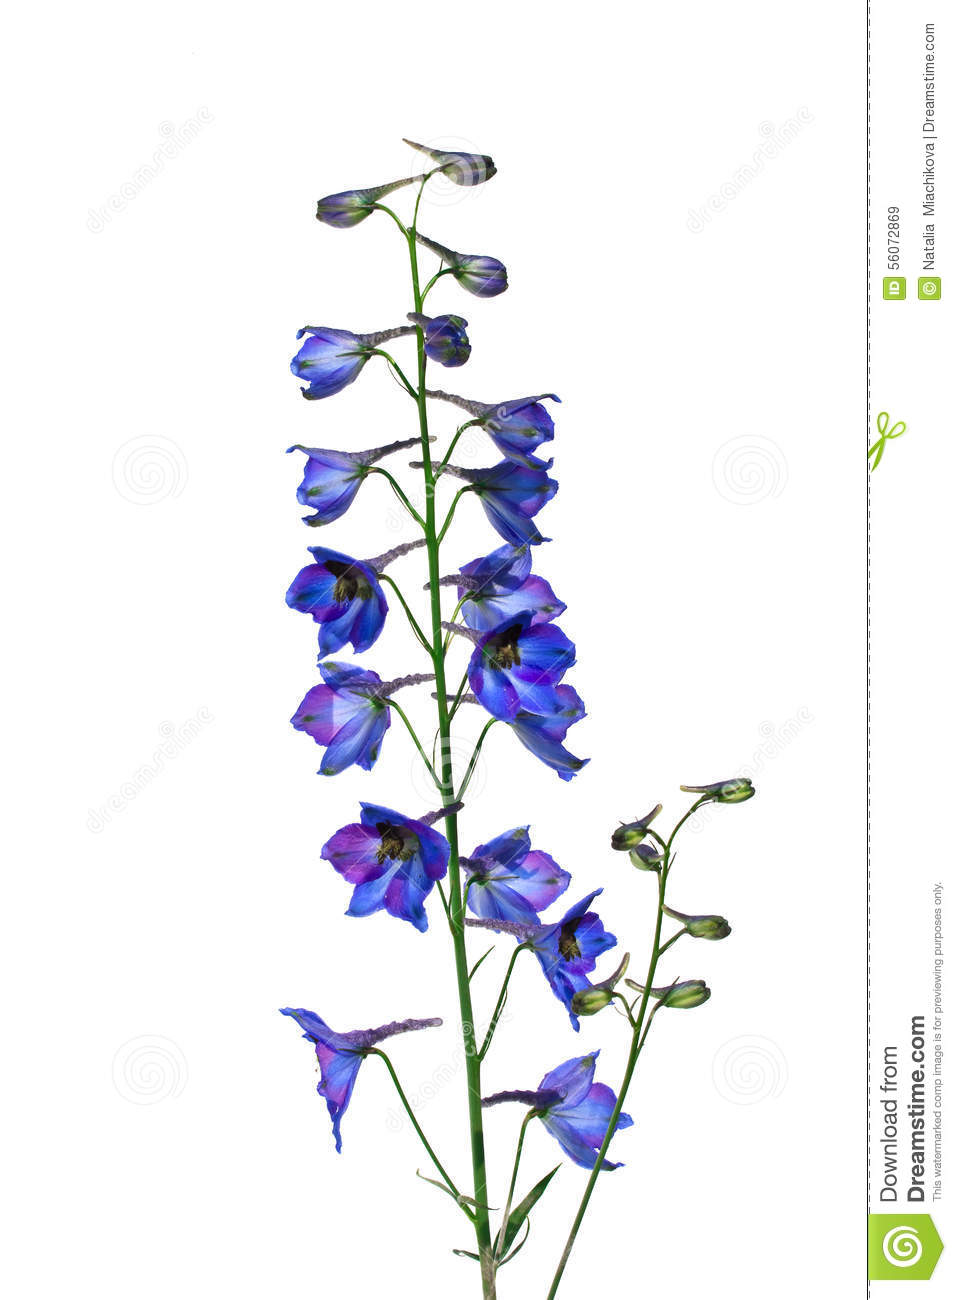 Isolate Flower Delphinium ( Larkspur ) On A White Background Stock.